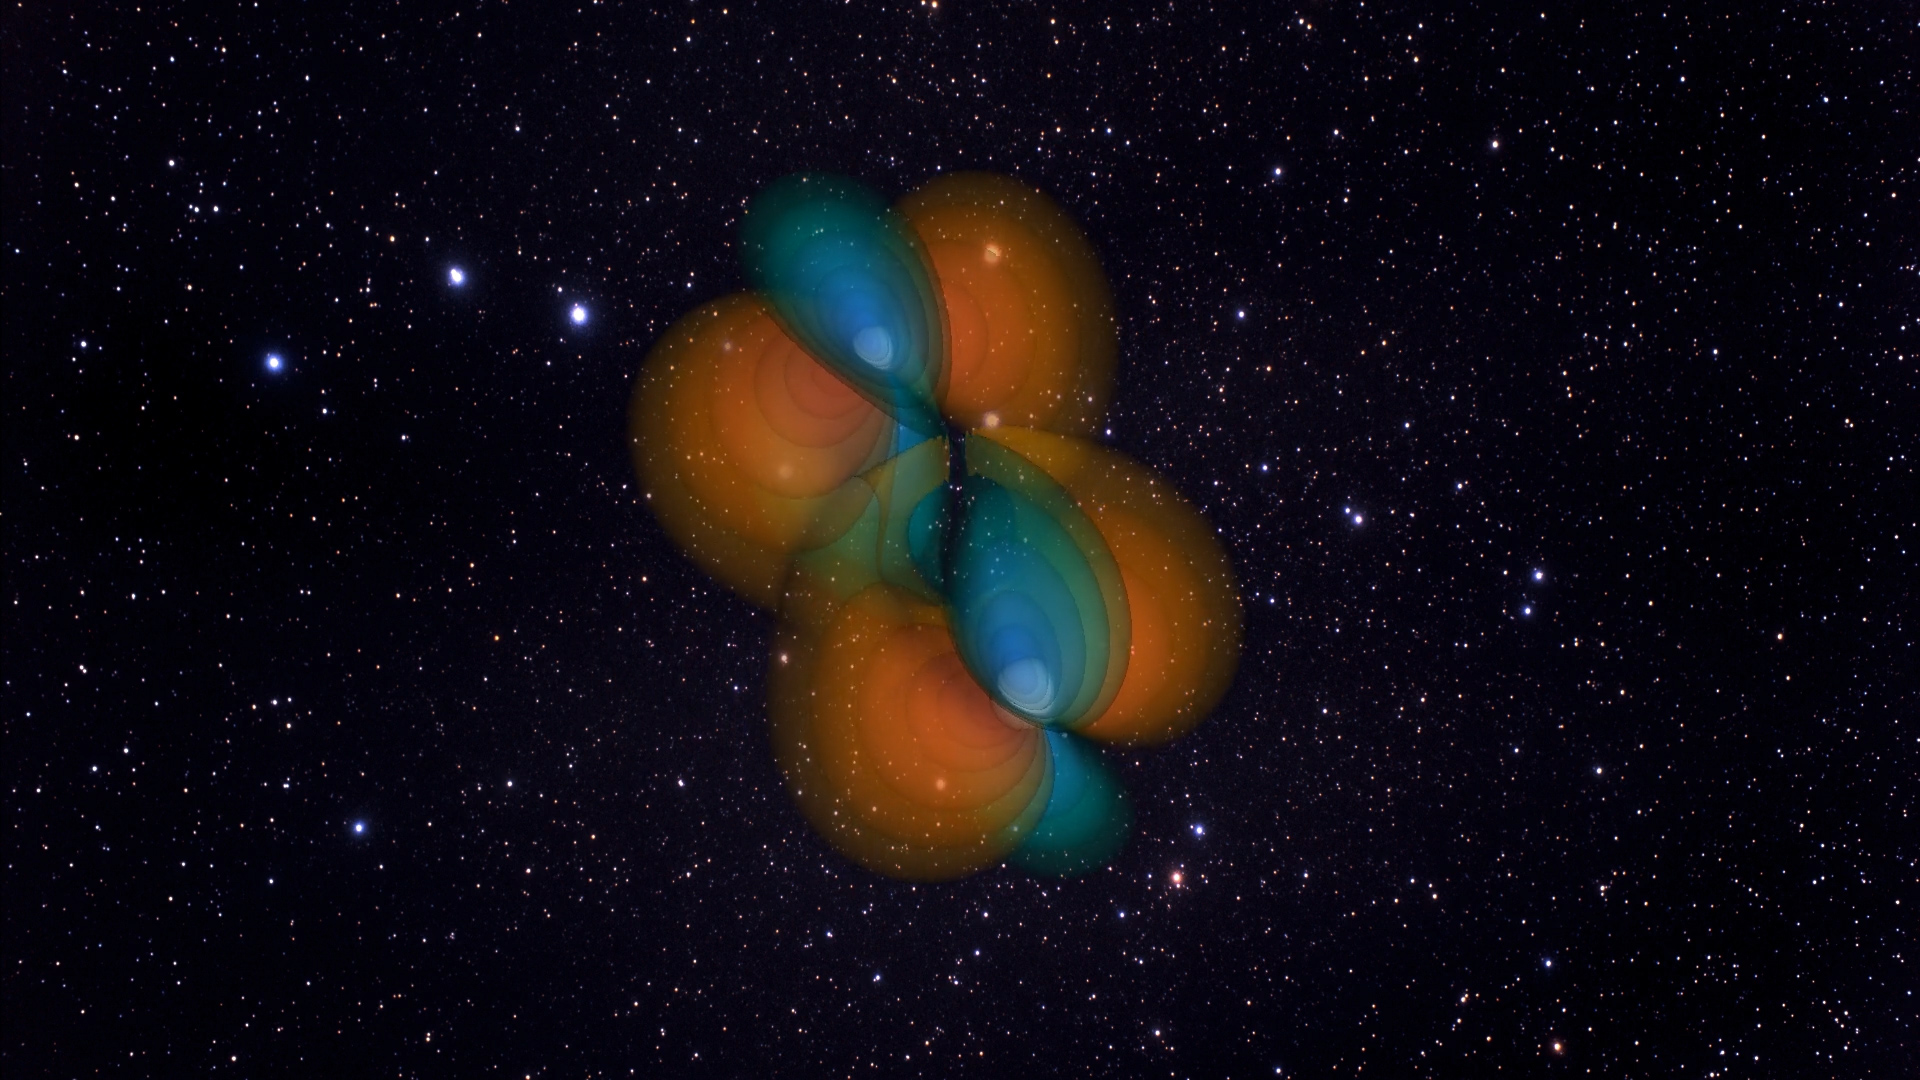 Visualization of the first binary black black hole coalescence discovered, GW150914, which was announced on February 11, 2016. The two black holes are in orbit around each other, getting closer together, losing energy to gravitational waves, seen here as colored contours.The two white spheres are the black holes, colored white for visibility. The image was taken from a binary/simulation that was created by Georgia Tech's team, including Matt Kinsey, Karan Jani and Michael Clark.